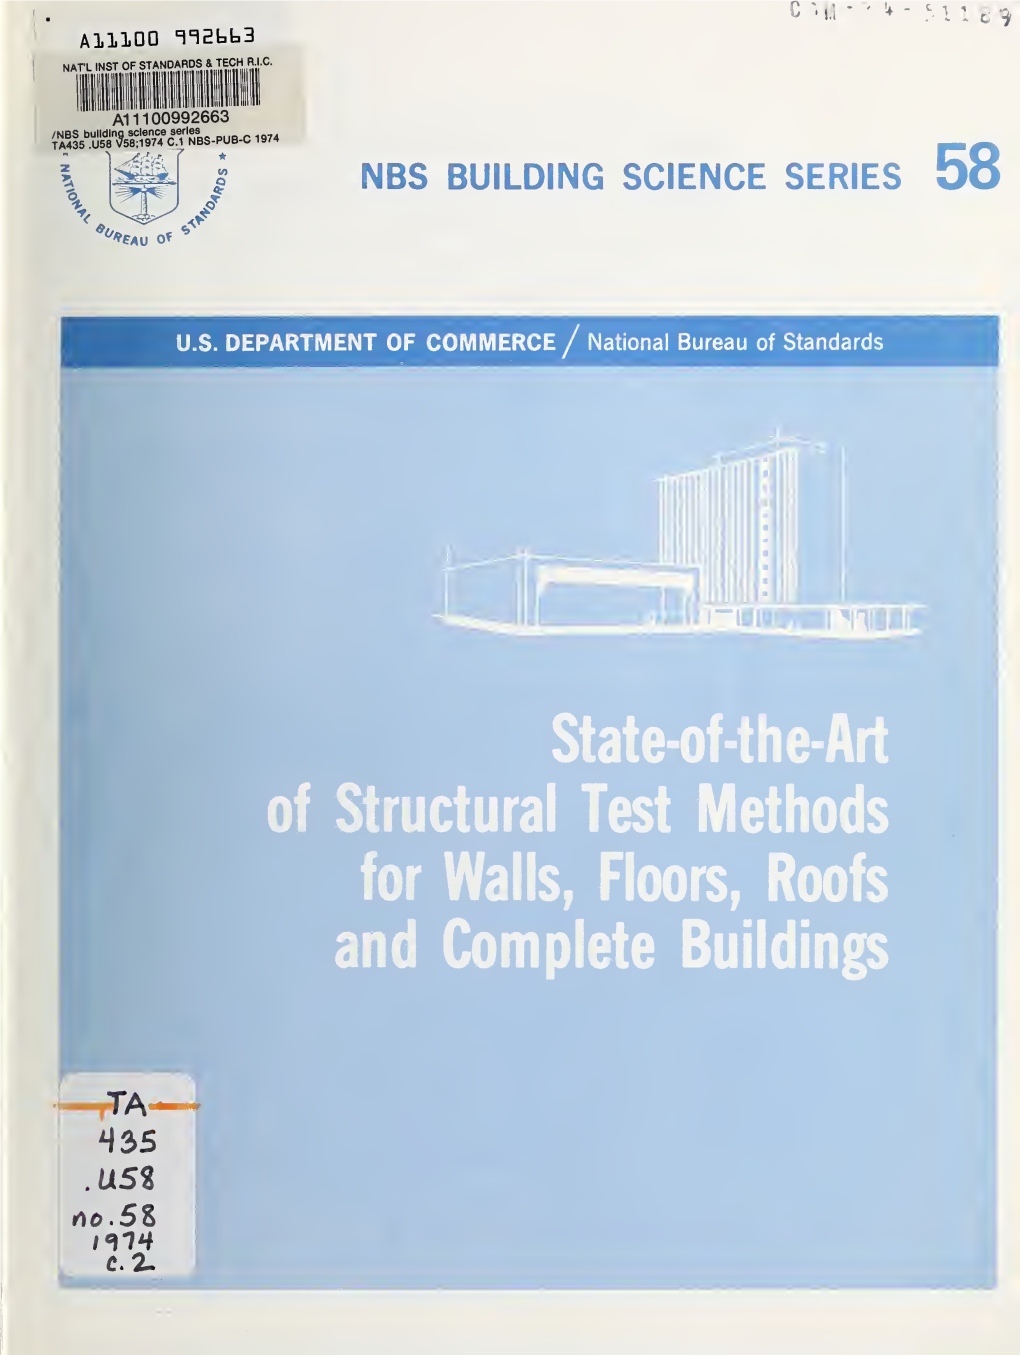 State-Of-The-Art of Structural Test Methods for Walls, Floors, Roofs and Complete Buildings